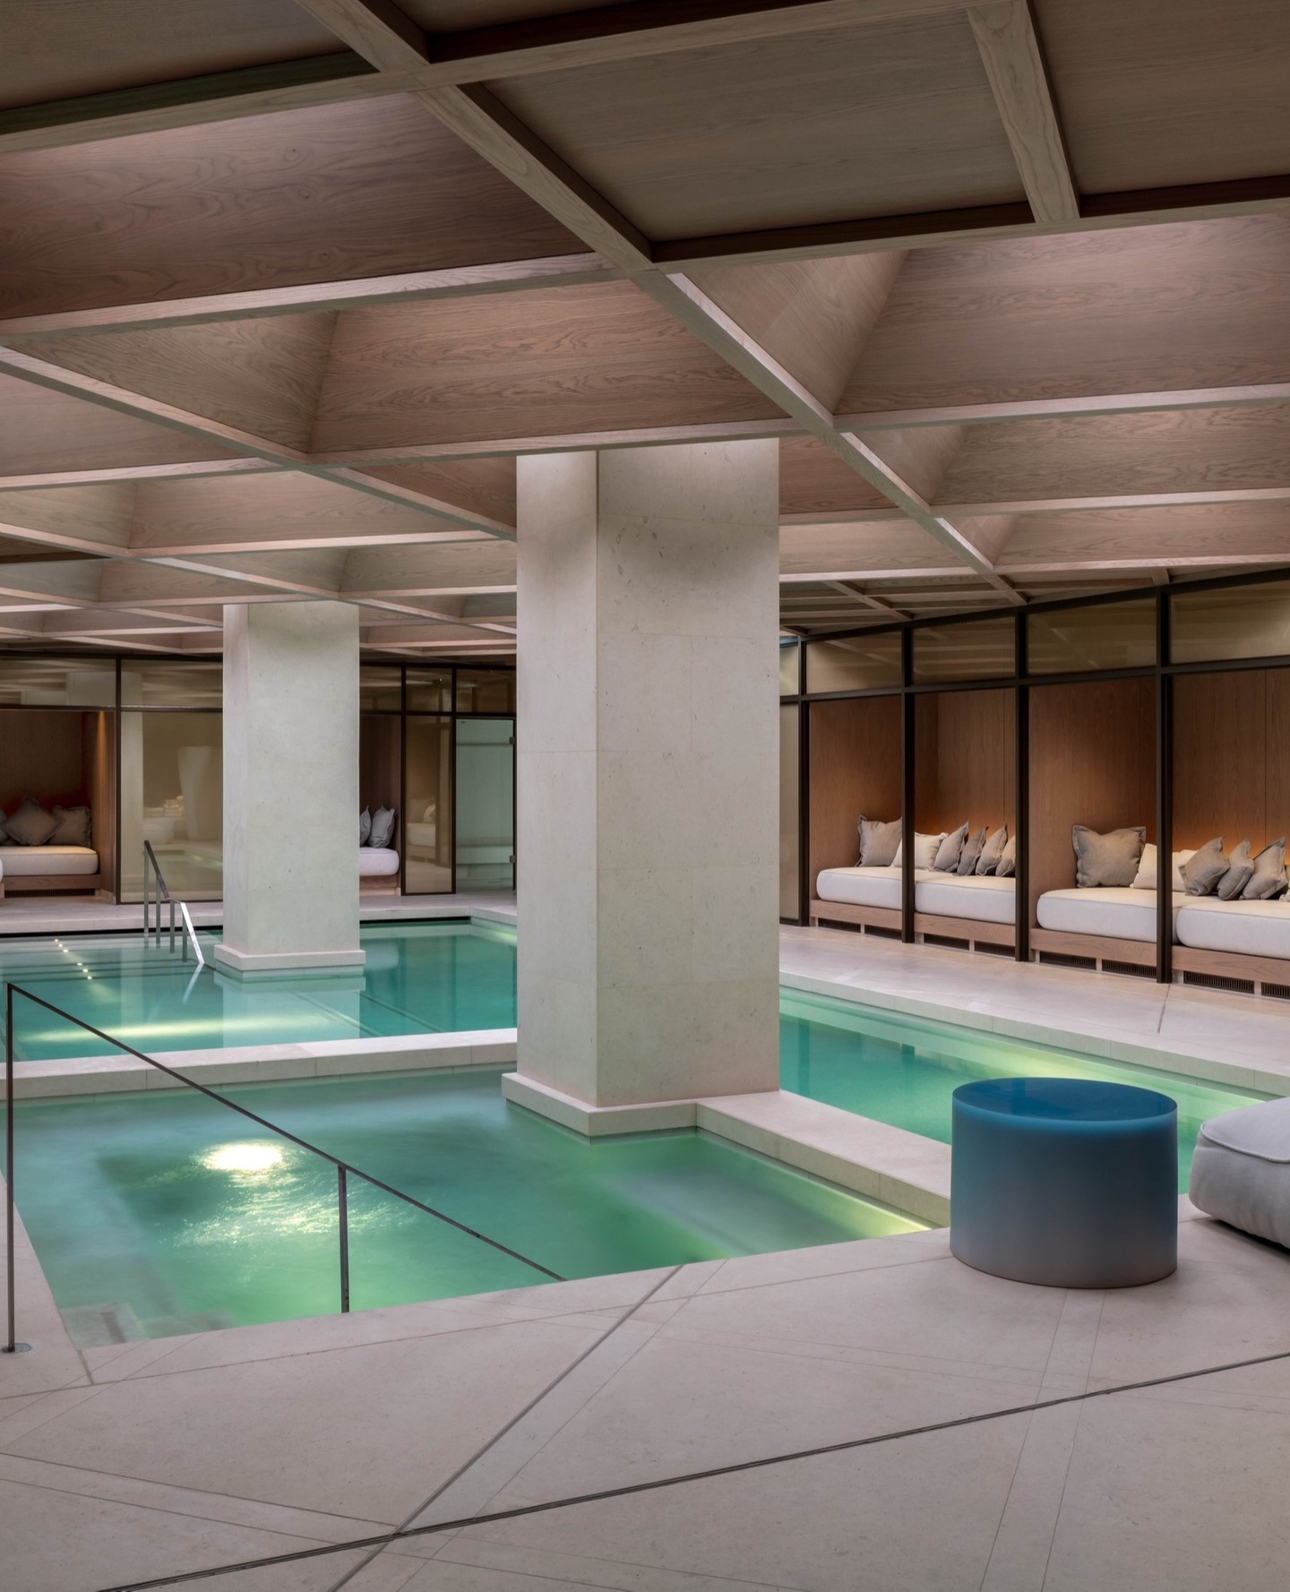 The Londoner's pool area with marble pillars and comfy seating areas